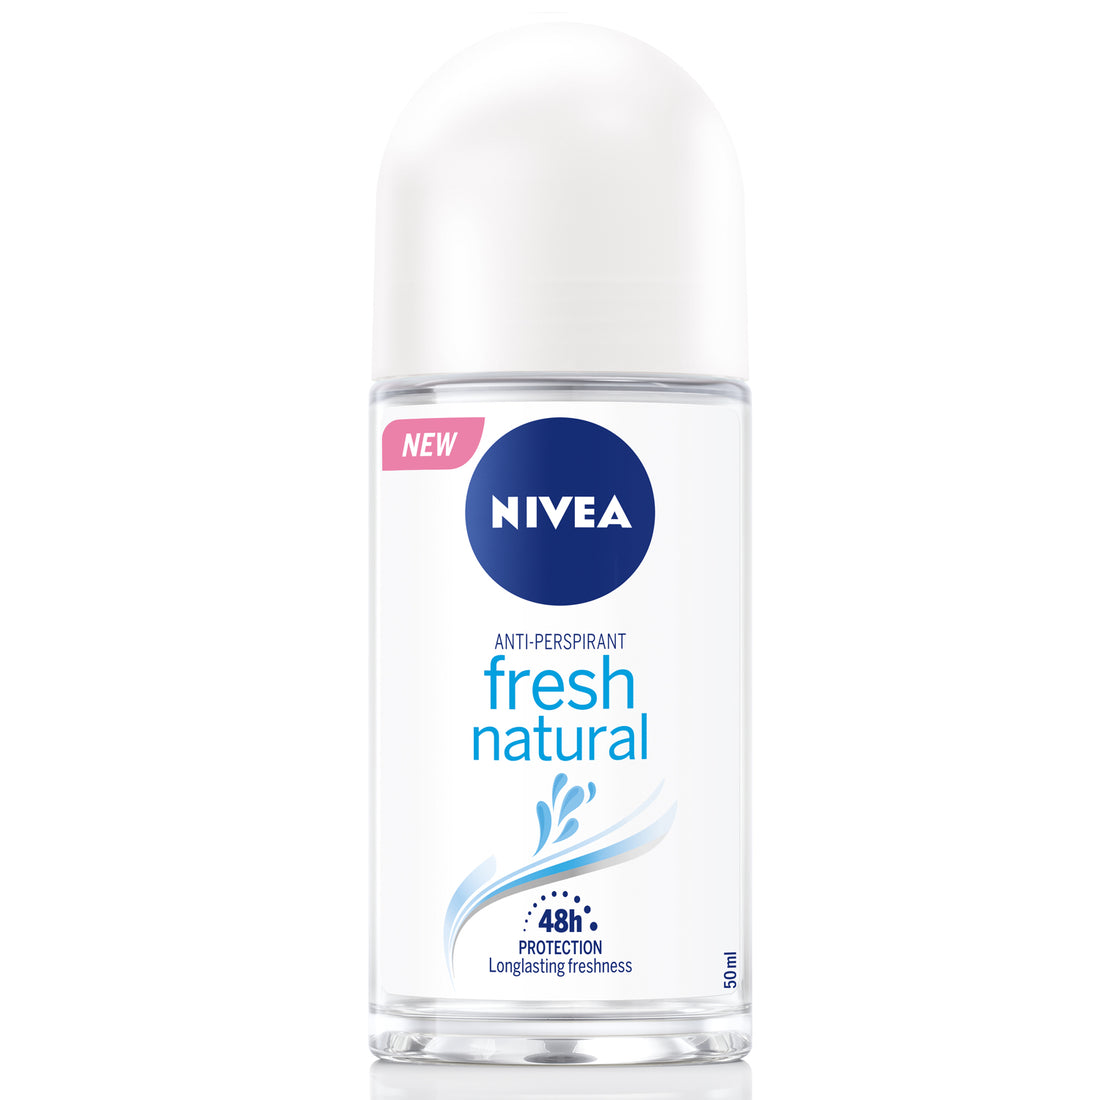 Nivea Fresh Natural, Deodorant for Women, Ocean Extracts, Roll-on 50ml